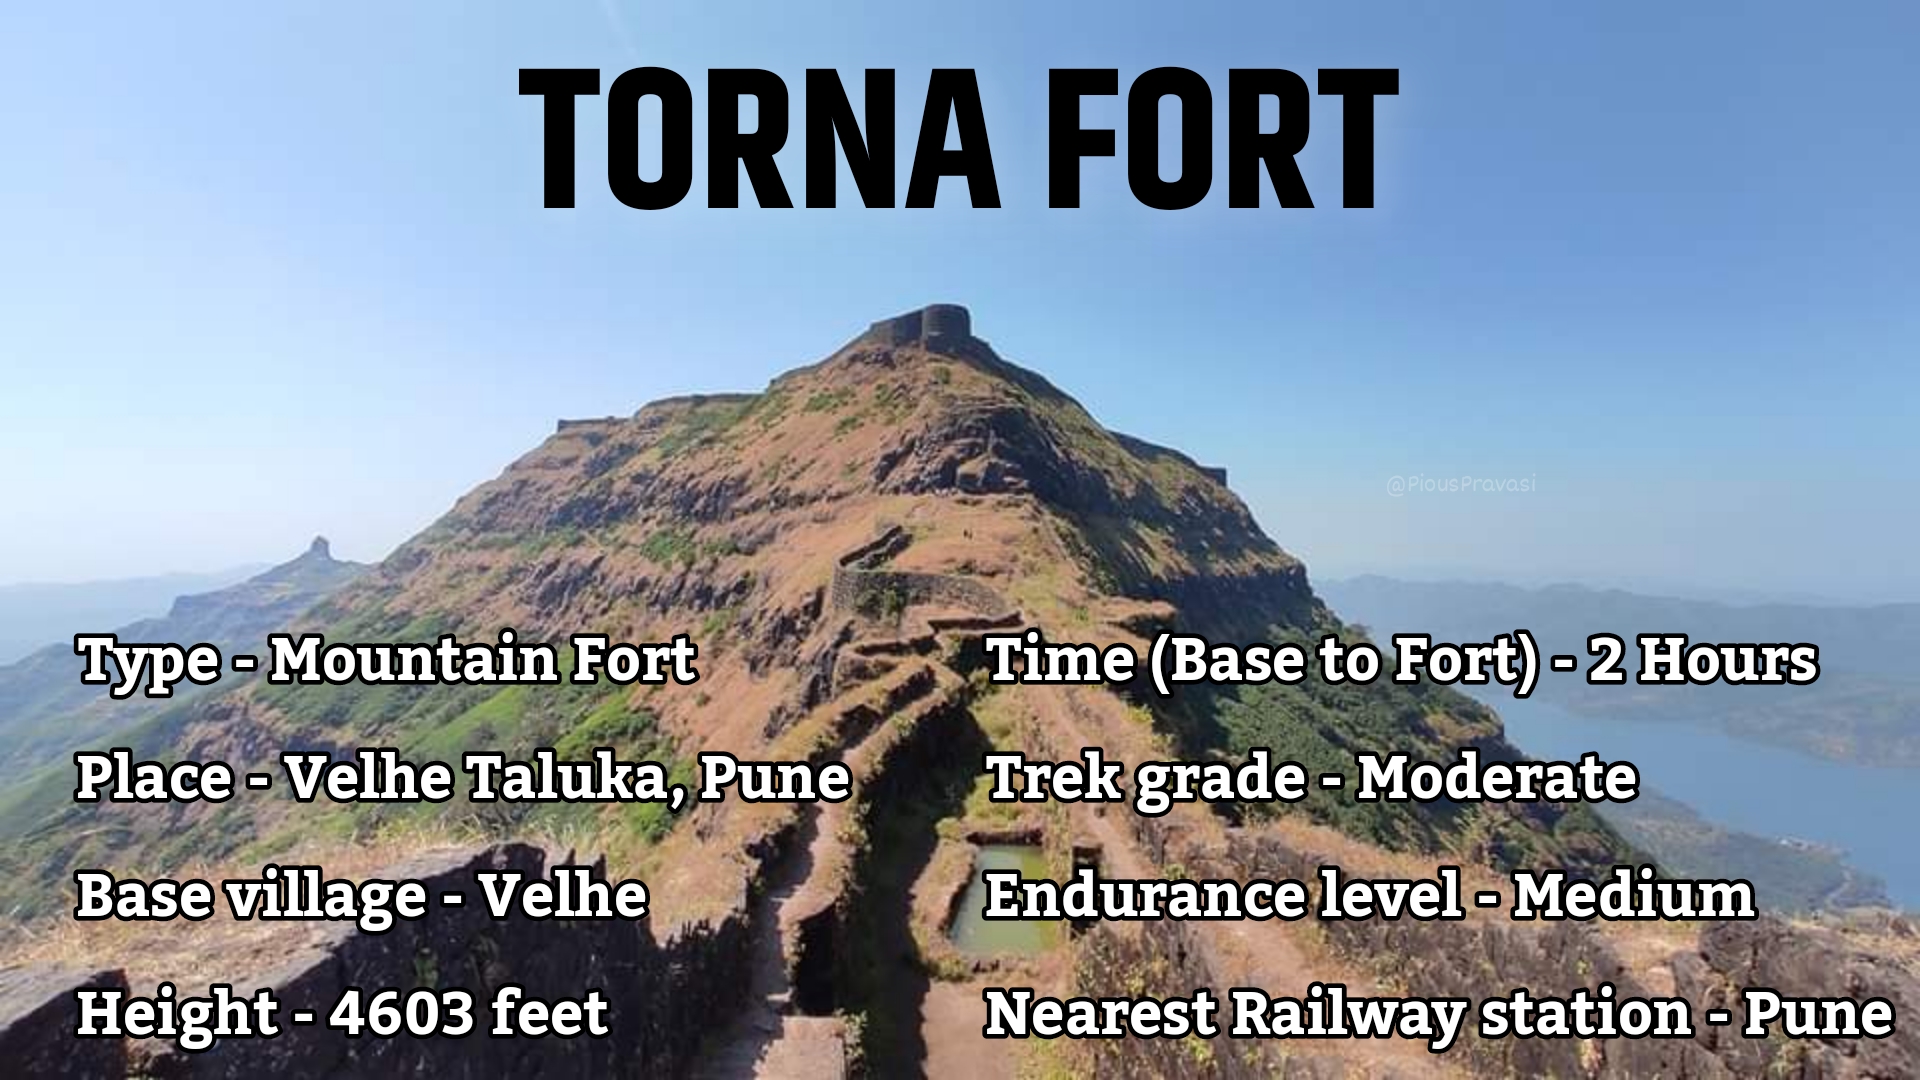 This 2 Hour ONLY Monsoon Trek To Torna Fort In Pune Is A Must Do